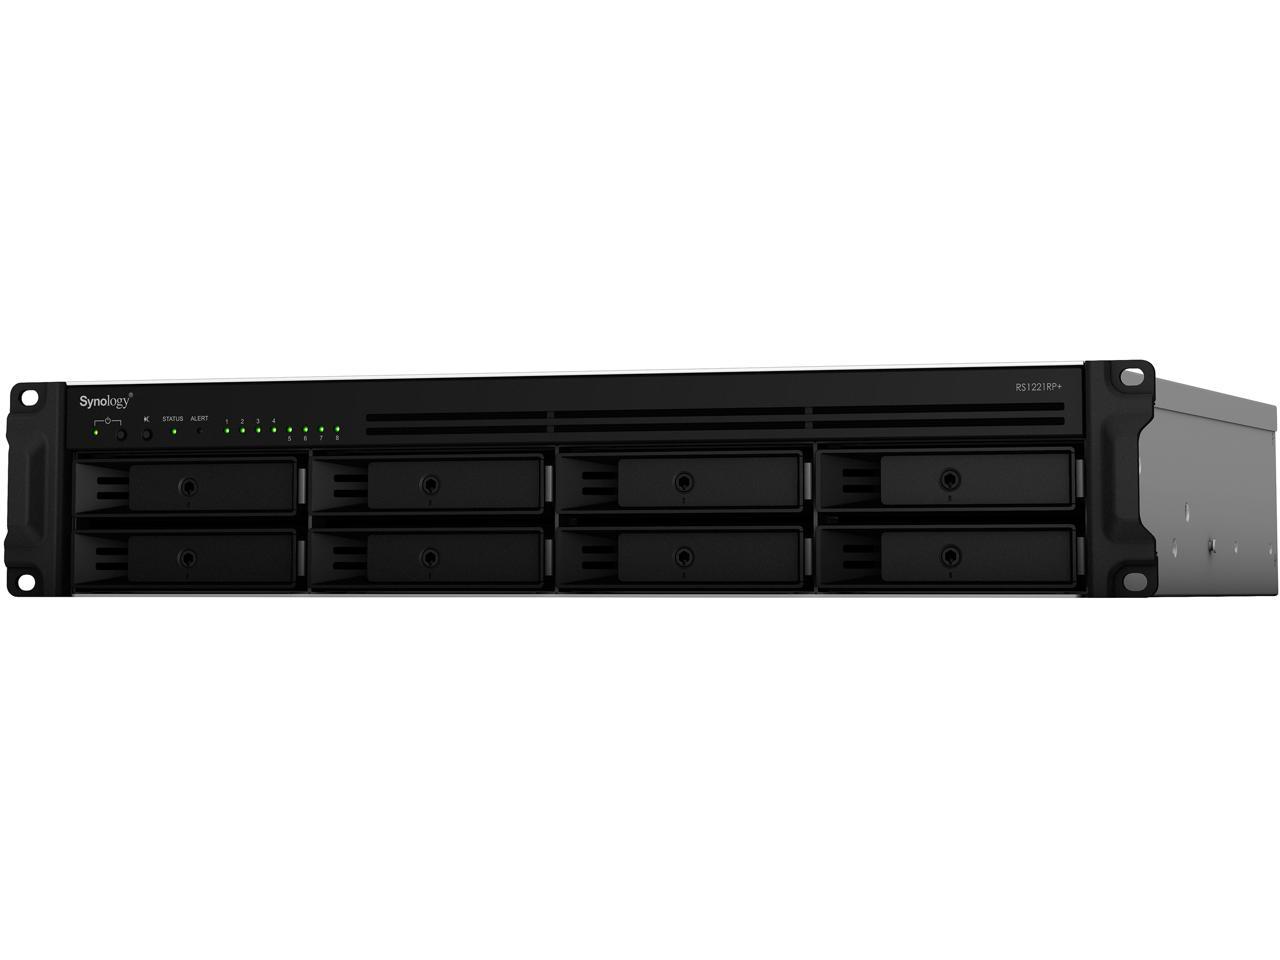 Synology RS1221RP+ RackStation with 8GB RAM and 96TB (8 x 12TB) of Synology Plus NAS Drives Fully Assembled and Tested